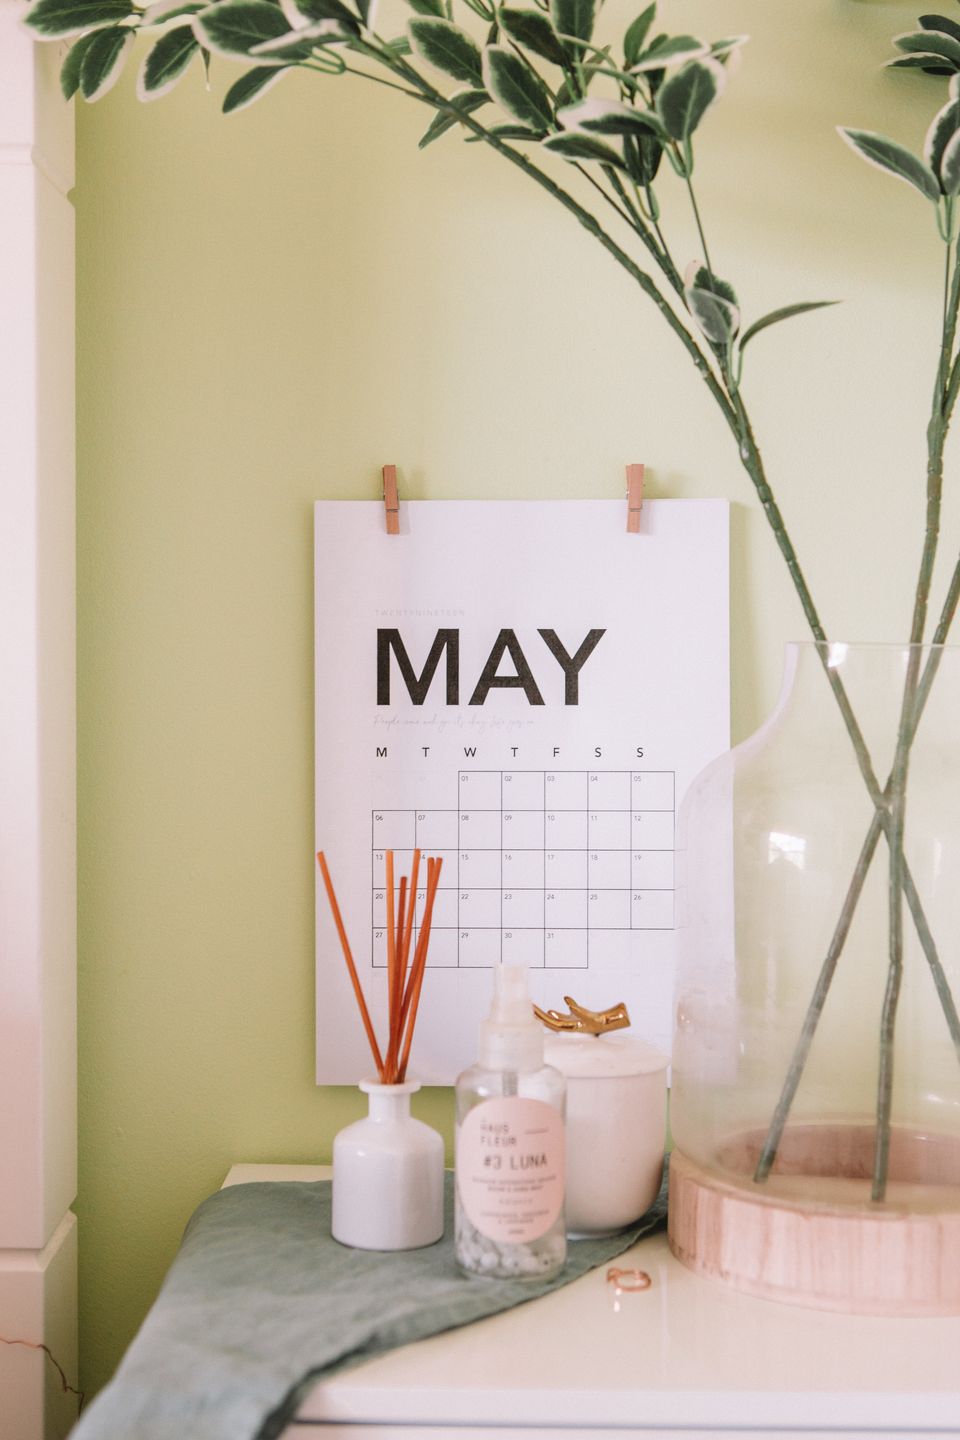 Stopping Daily Blogging in May